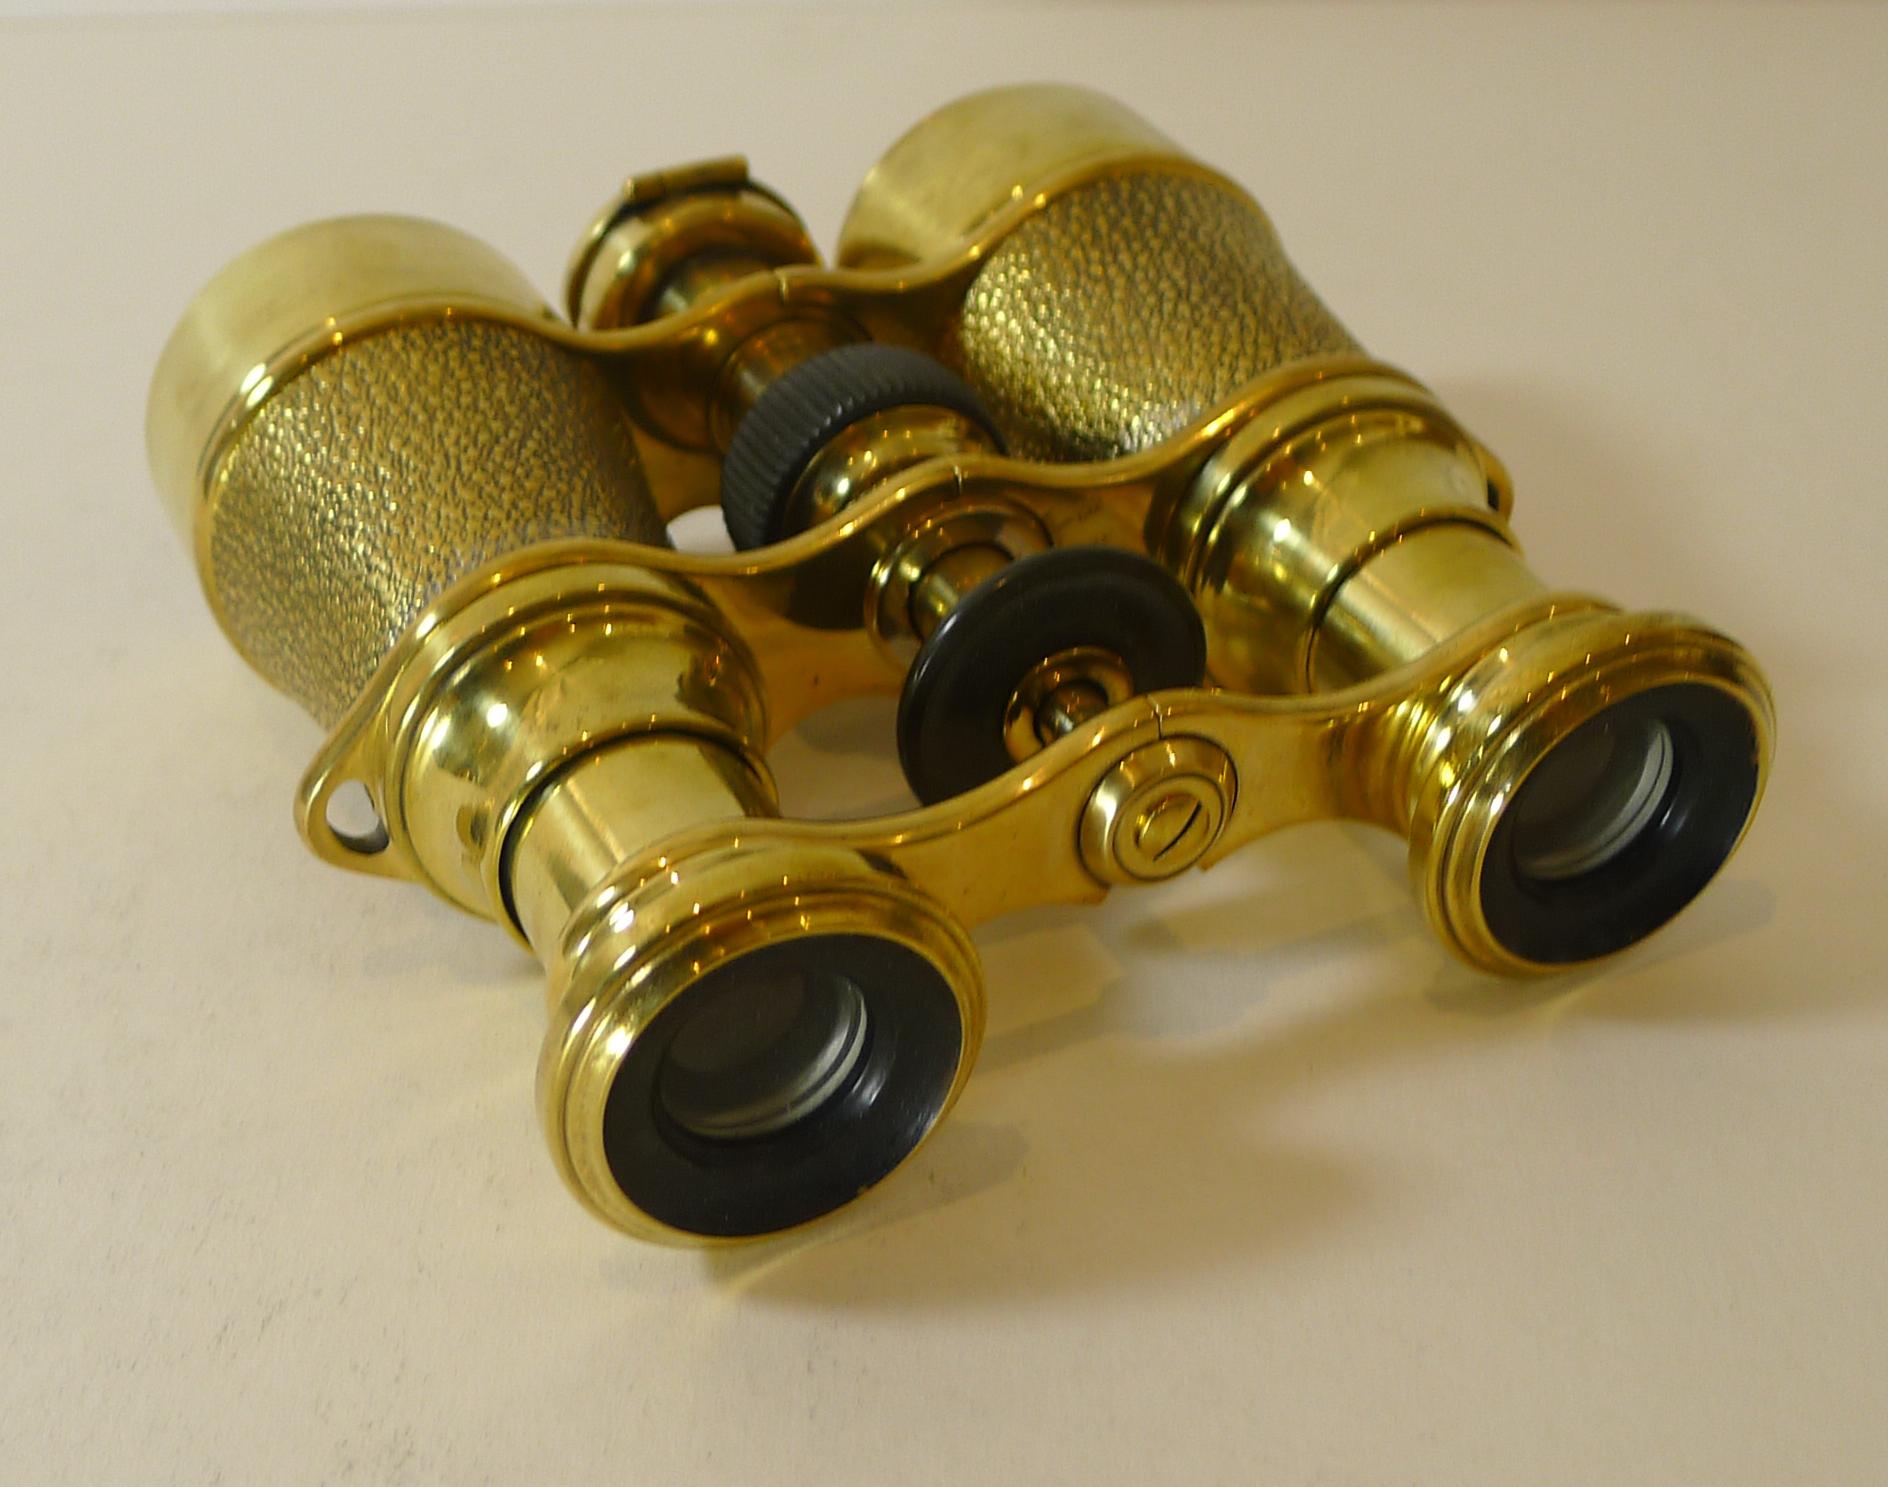 Brass Antique English Field Glasses / Binoculars by Lawrence and Mayo - With Compass